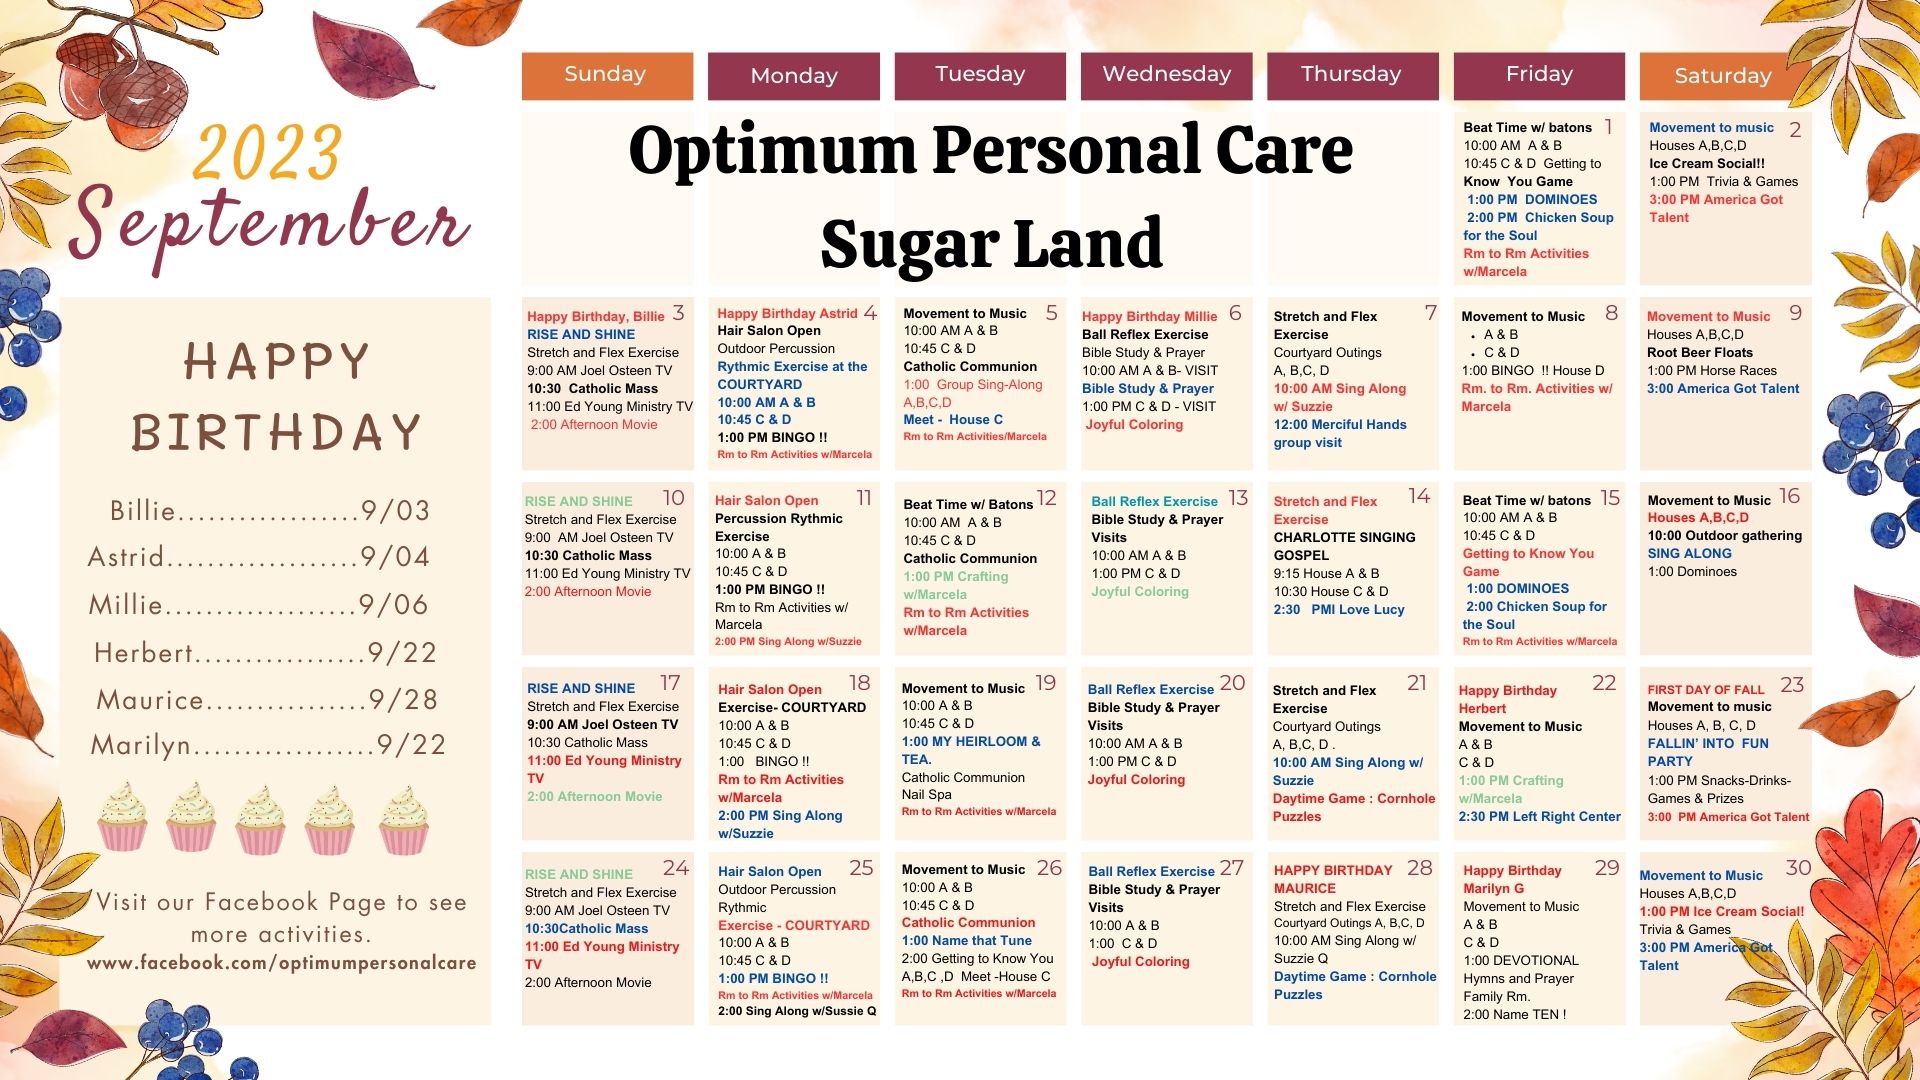 activity calendar for optimum personal care residents